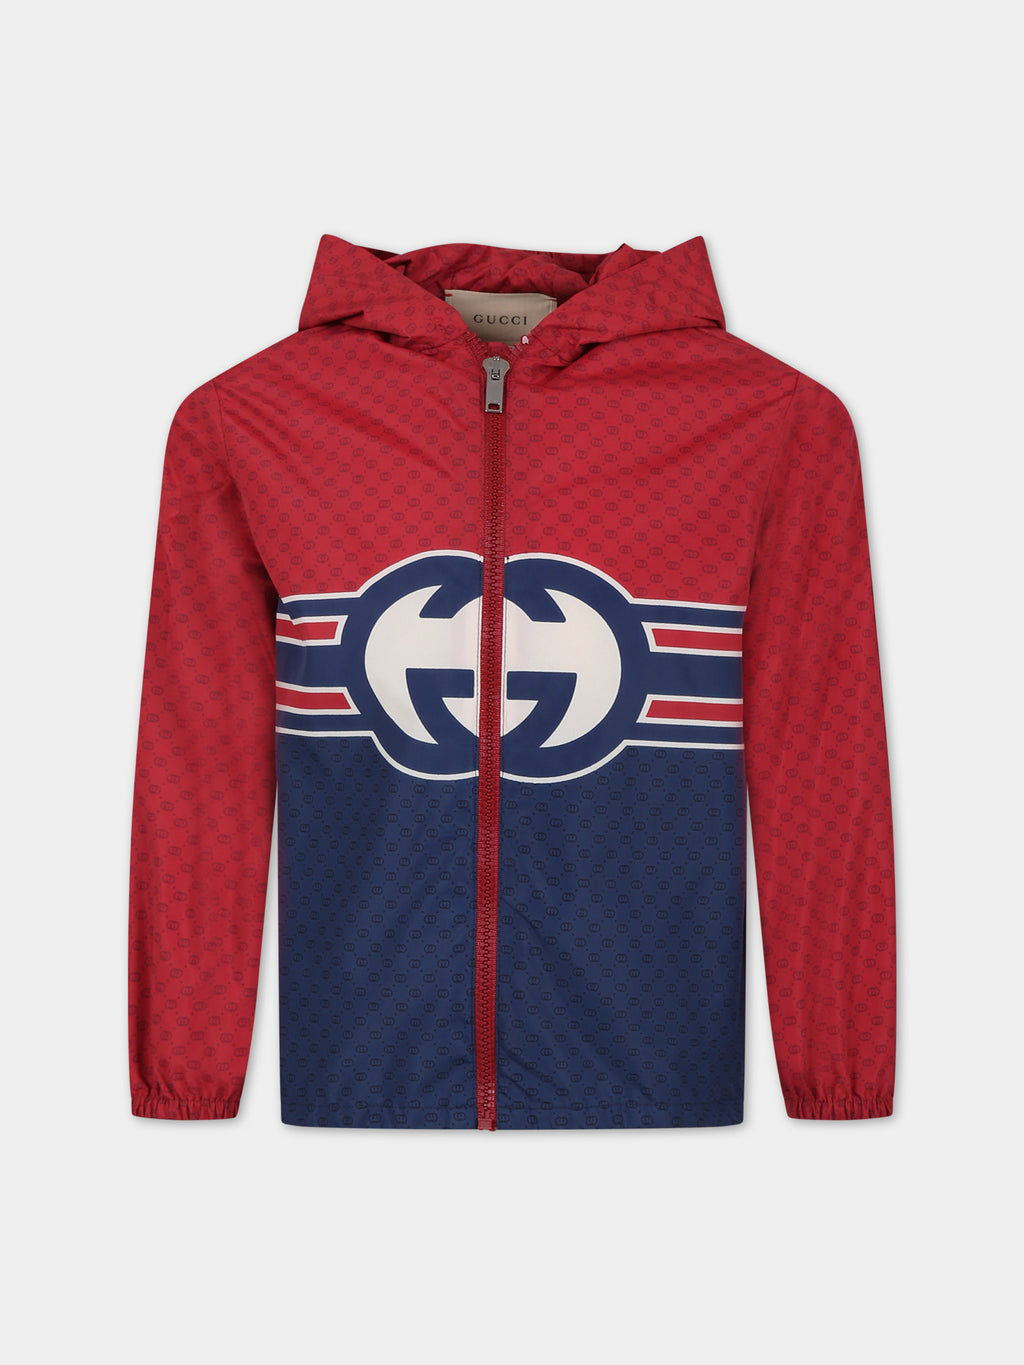 Windbreaker for boy with iconic GG logo